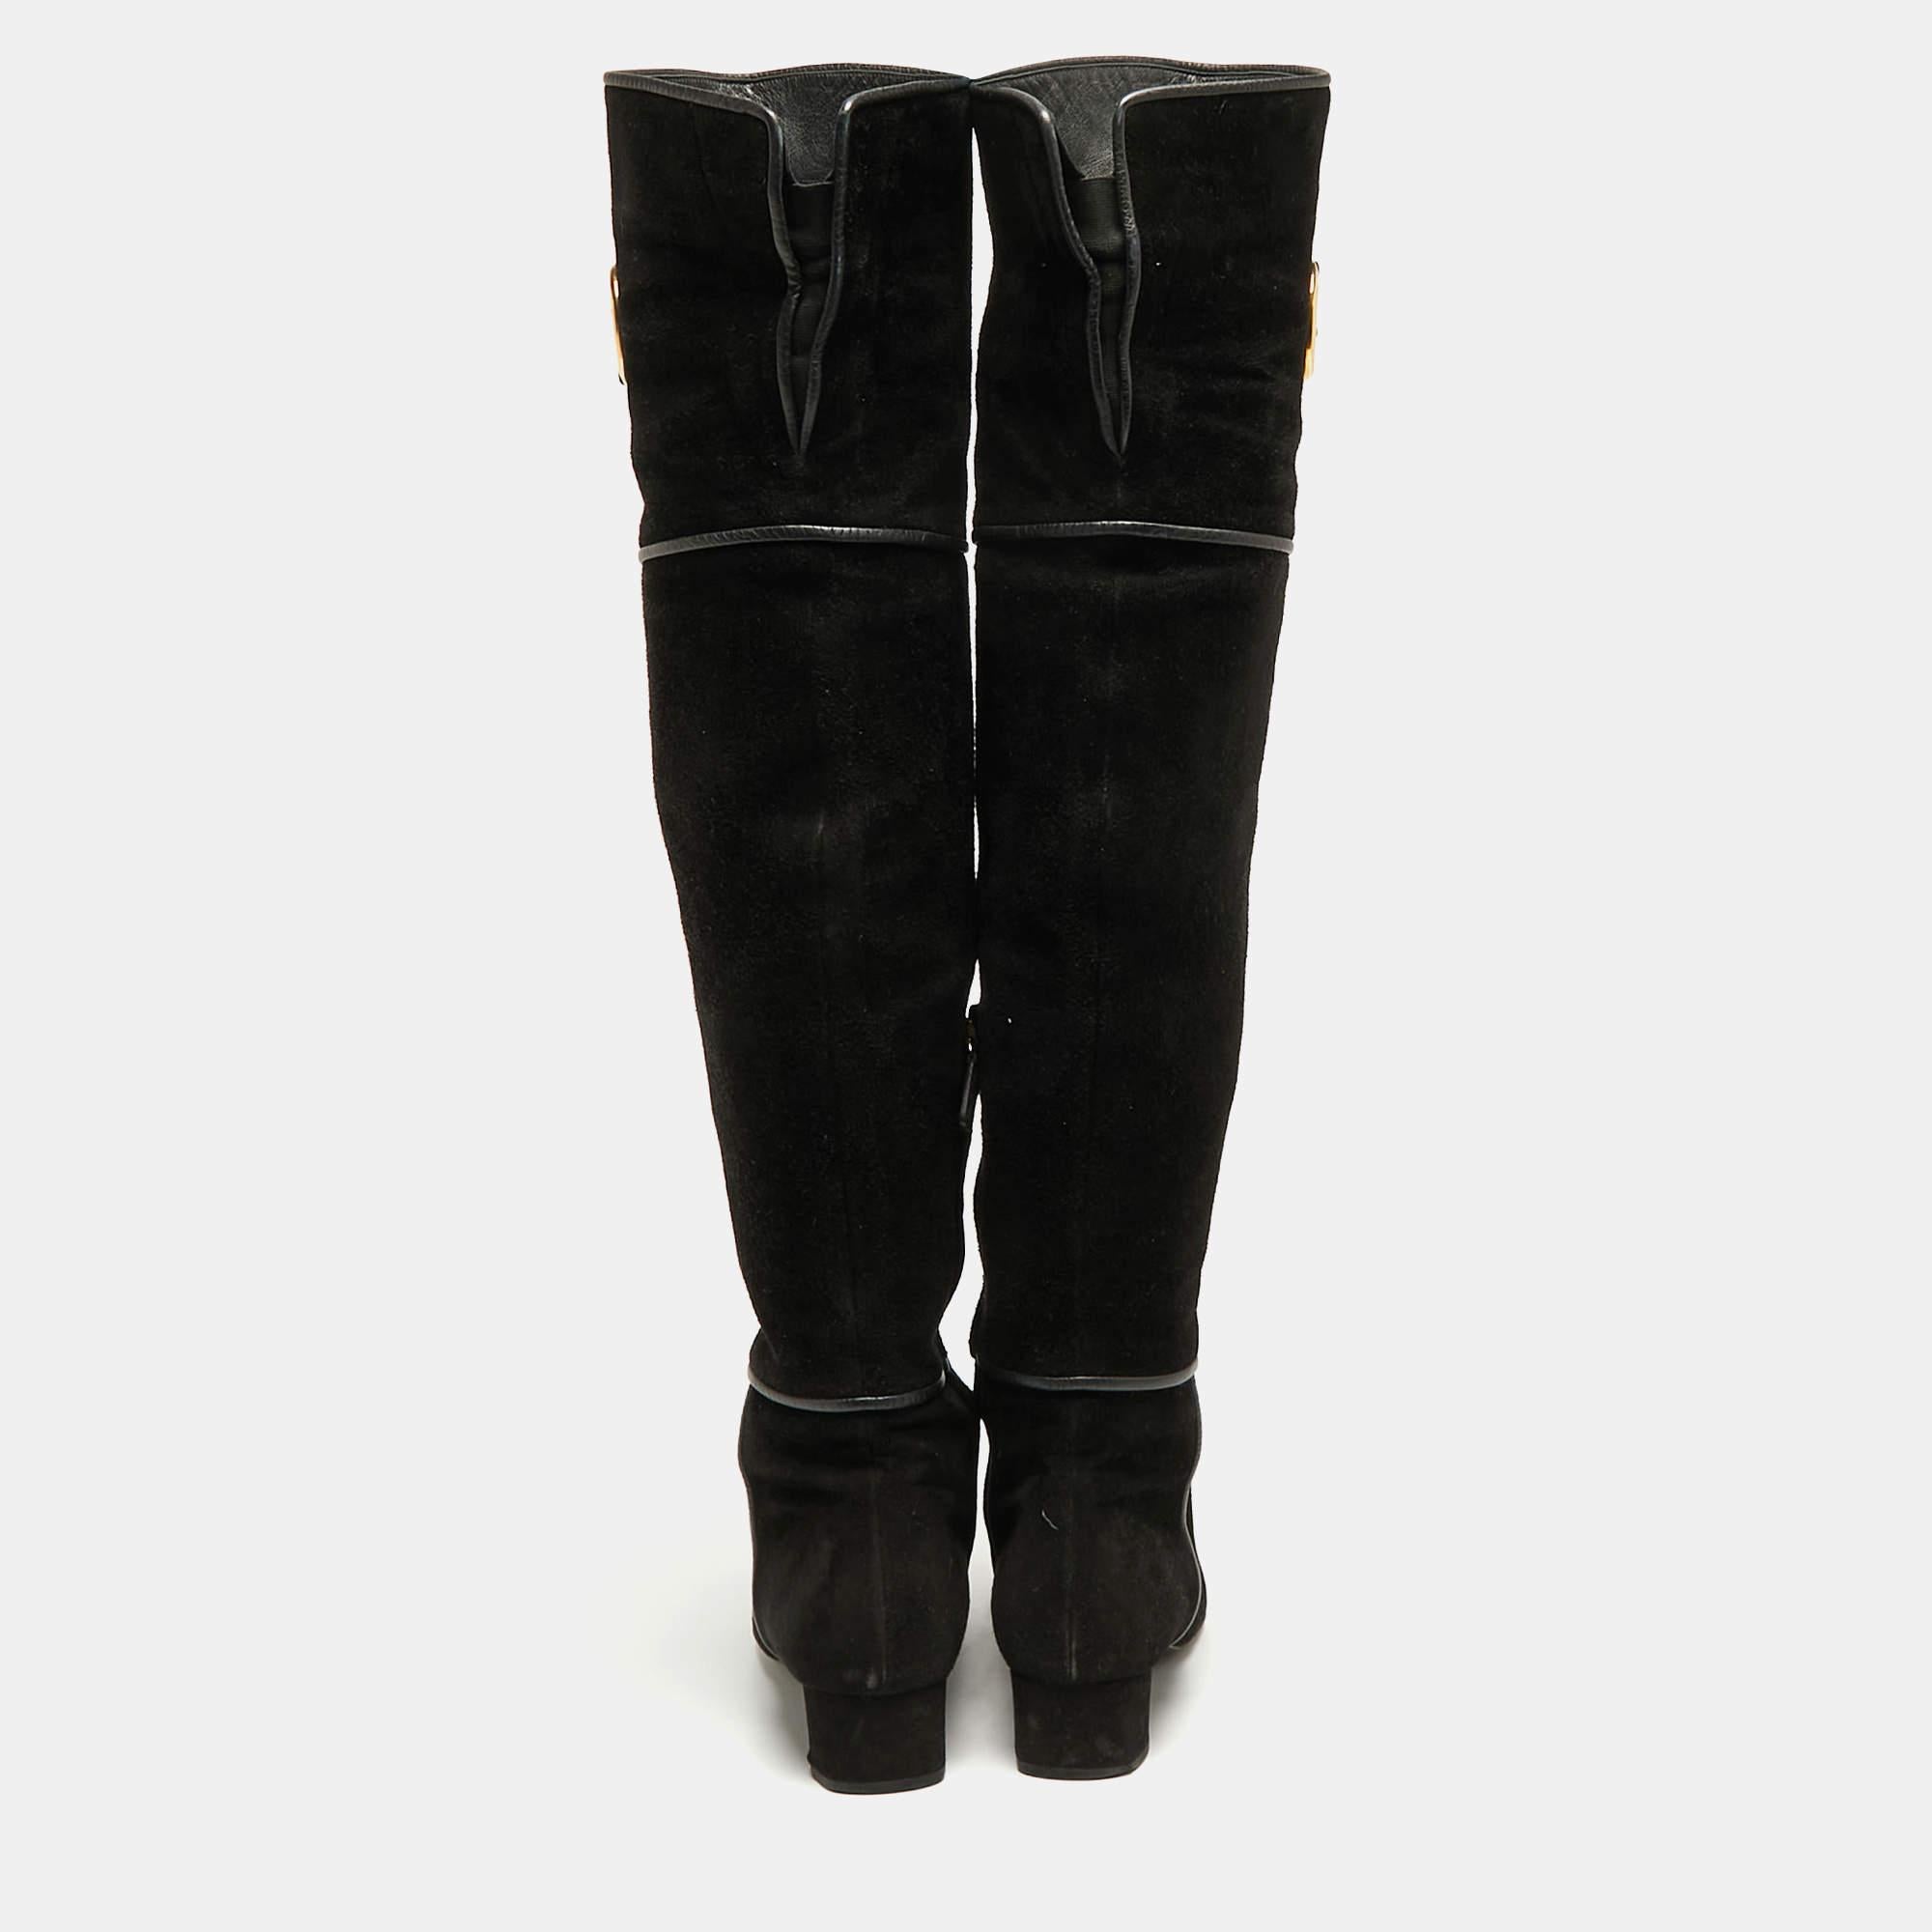 Gucci Black Suede Knee Length Boots Size 38.5 For Sale 1